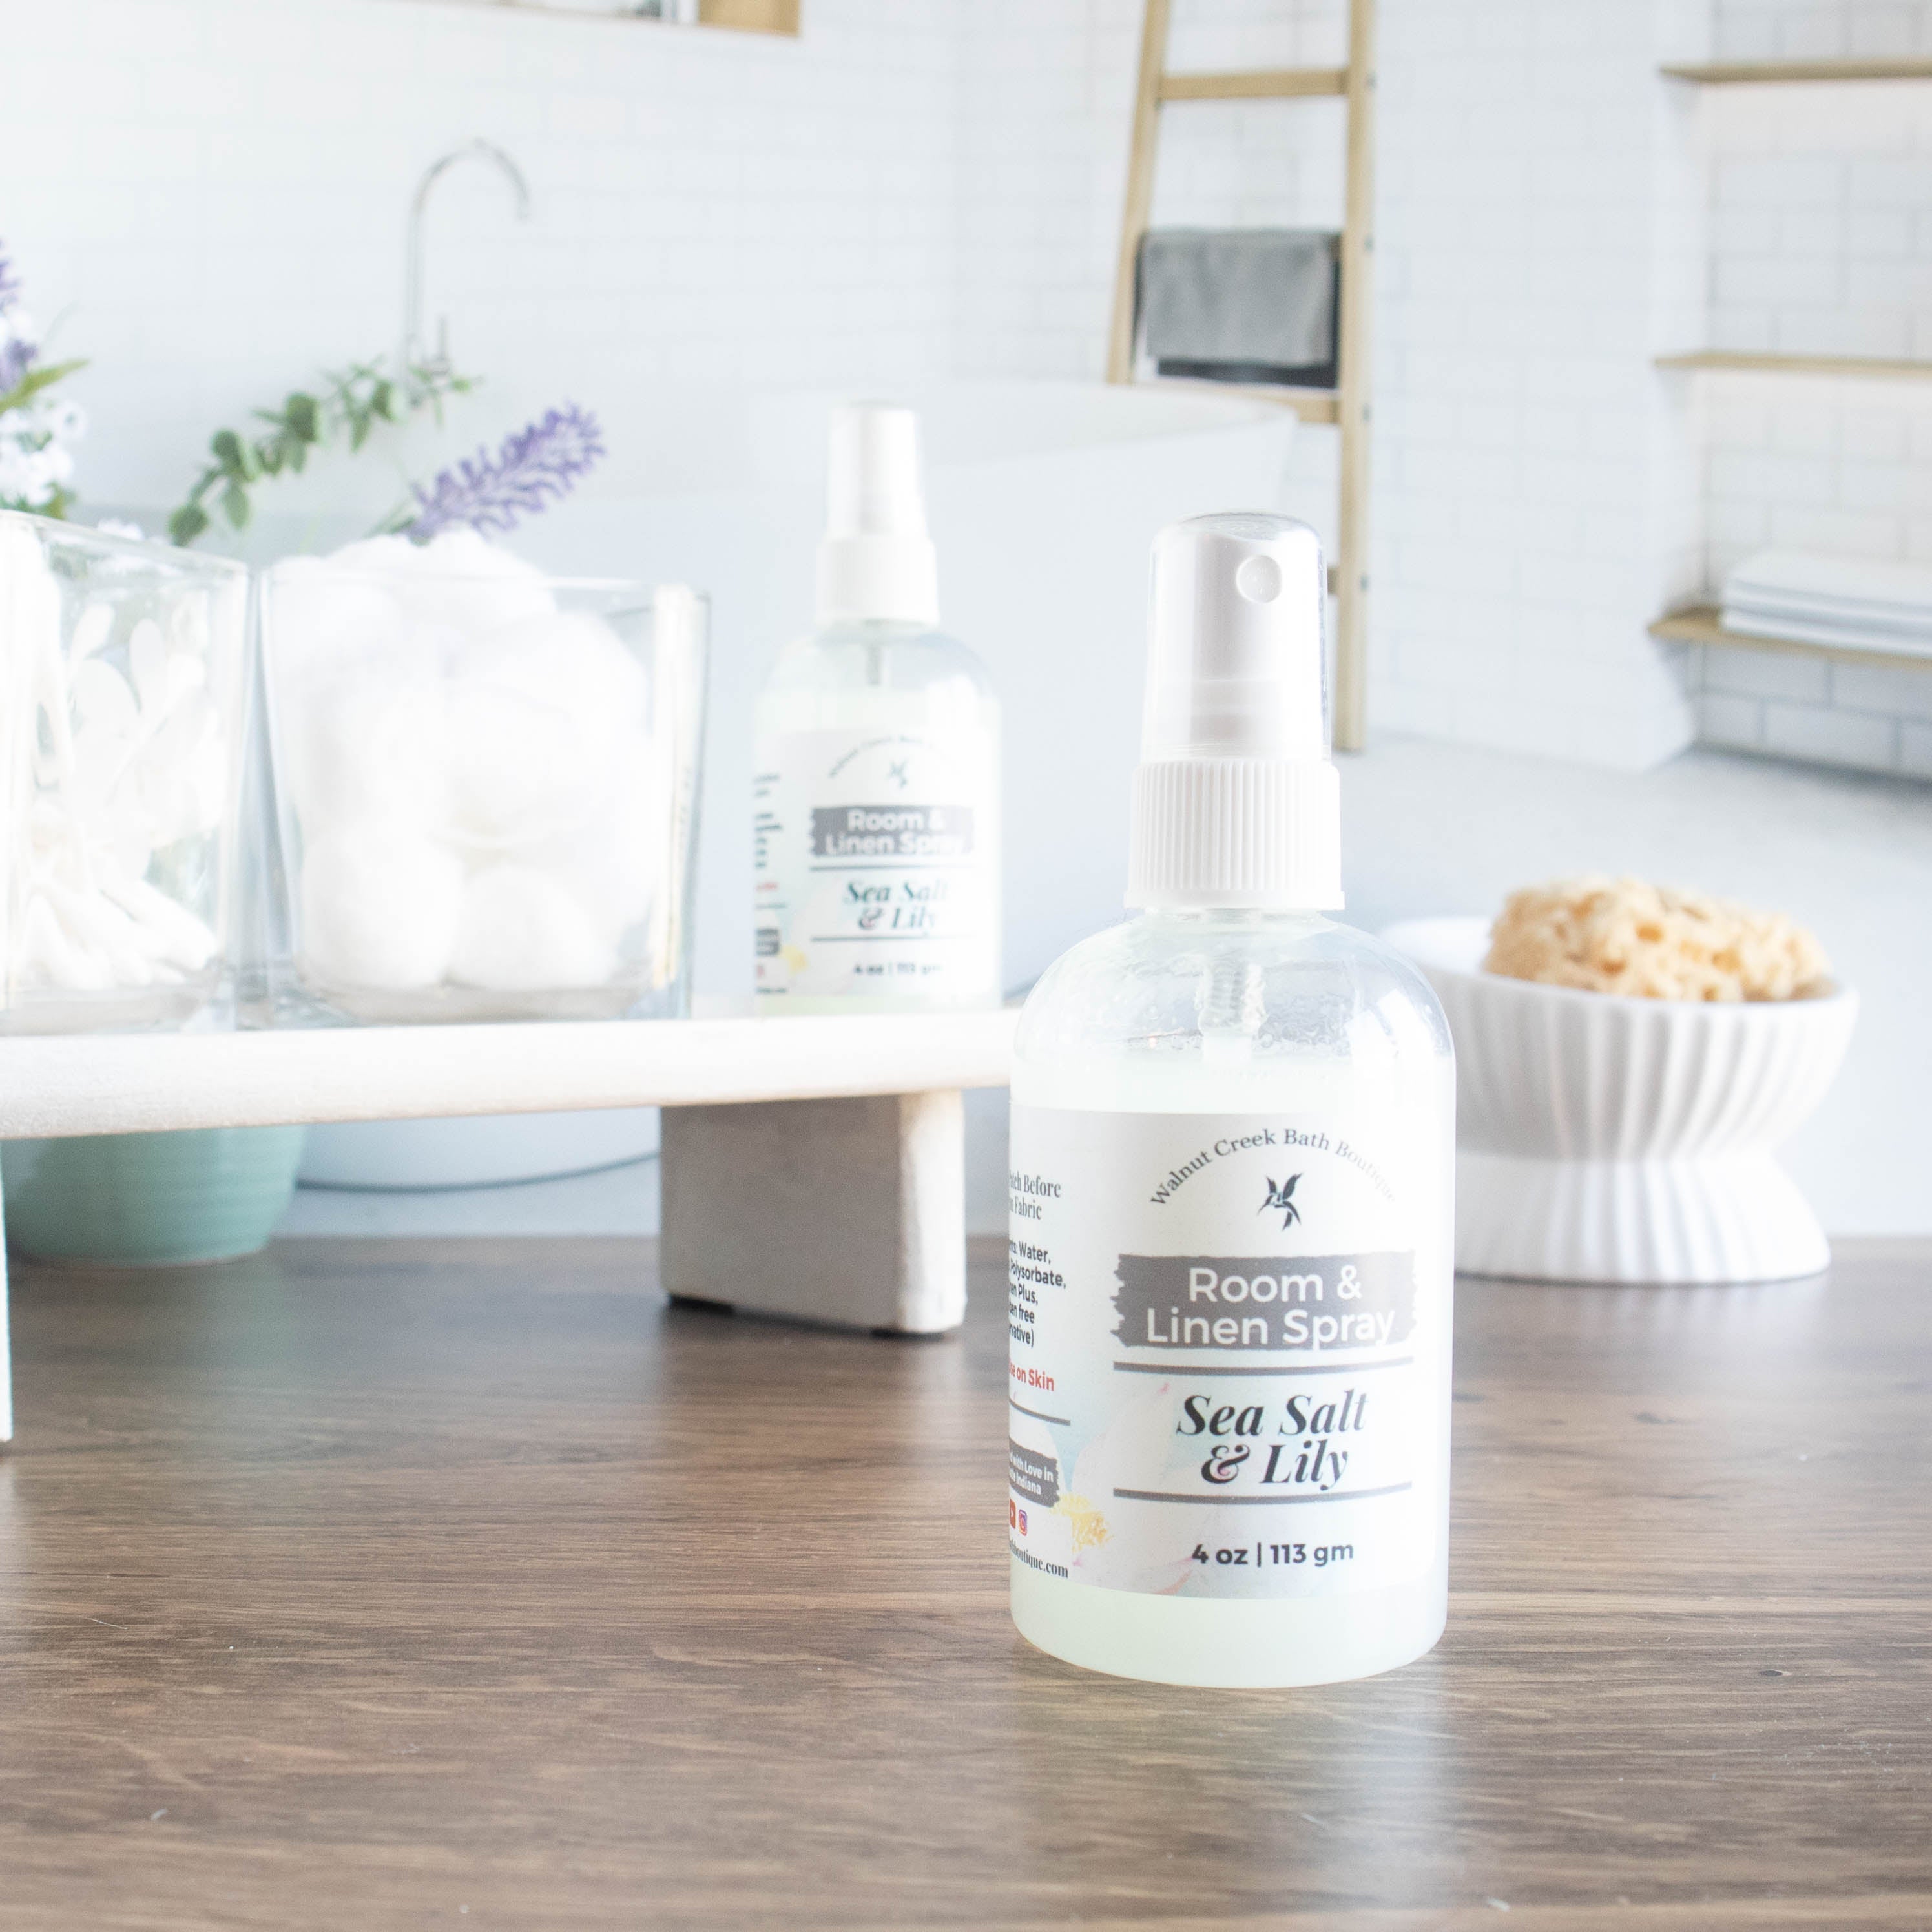 Sea Salt and Lilly room spray is front and center. it is in a squat round bottle with black sprayer. in the background is a tray with some cotton balls and q-tips in jars along with another room spray. in the background is an image of a spa bathroom and a dish with a loofah